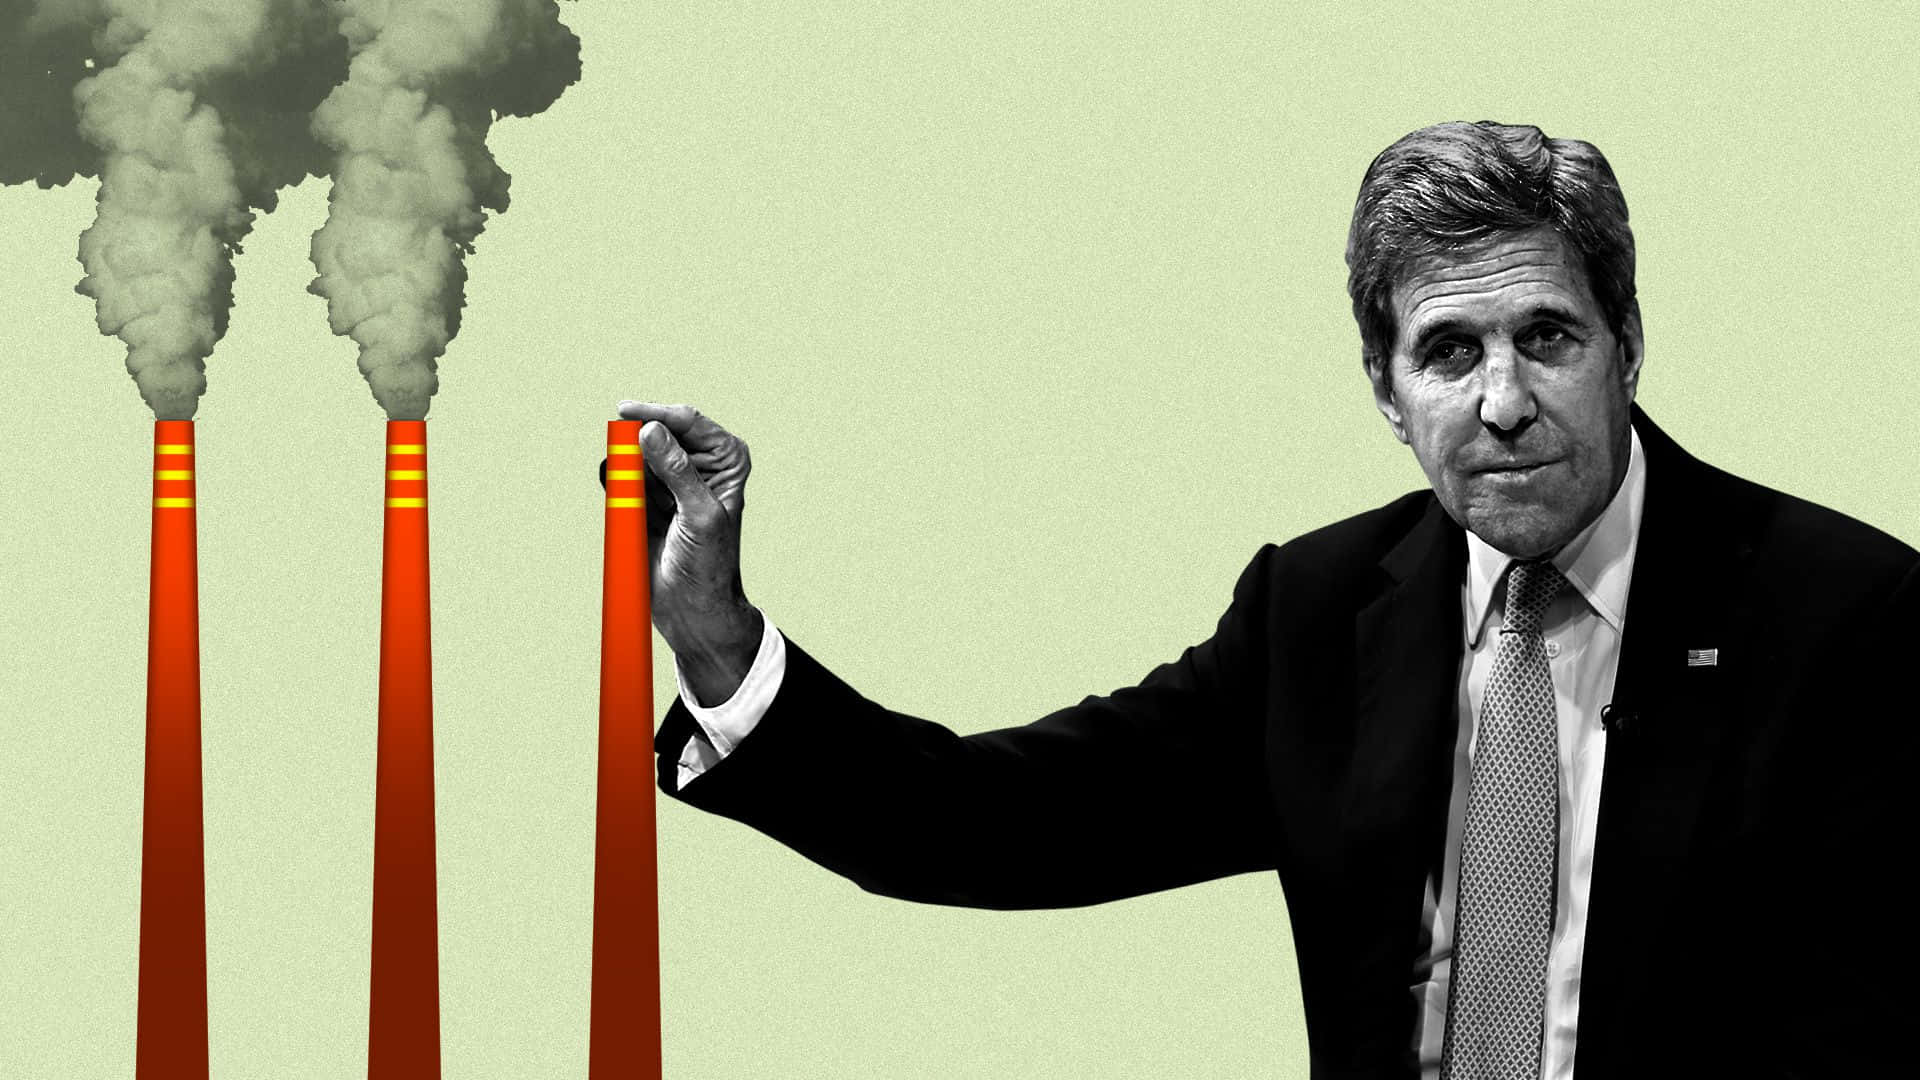 Digital Illustration About Climate Change Showing Us Climate Envoy John Kerry Covering The Opening Of A Factory Exhaust Pipe